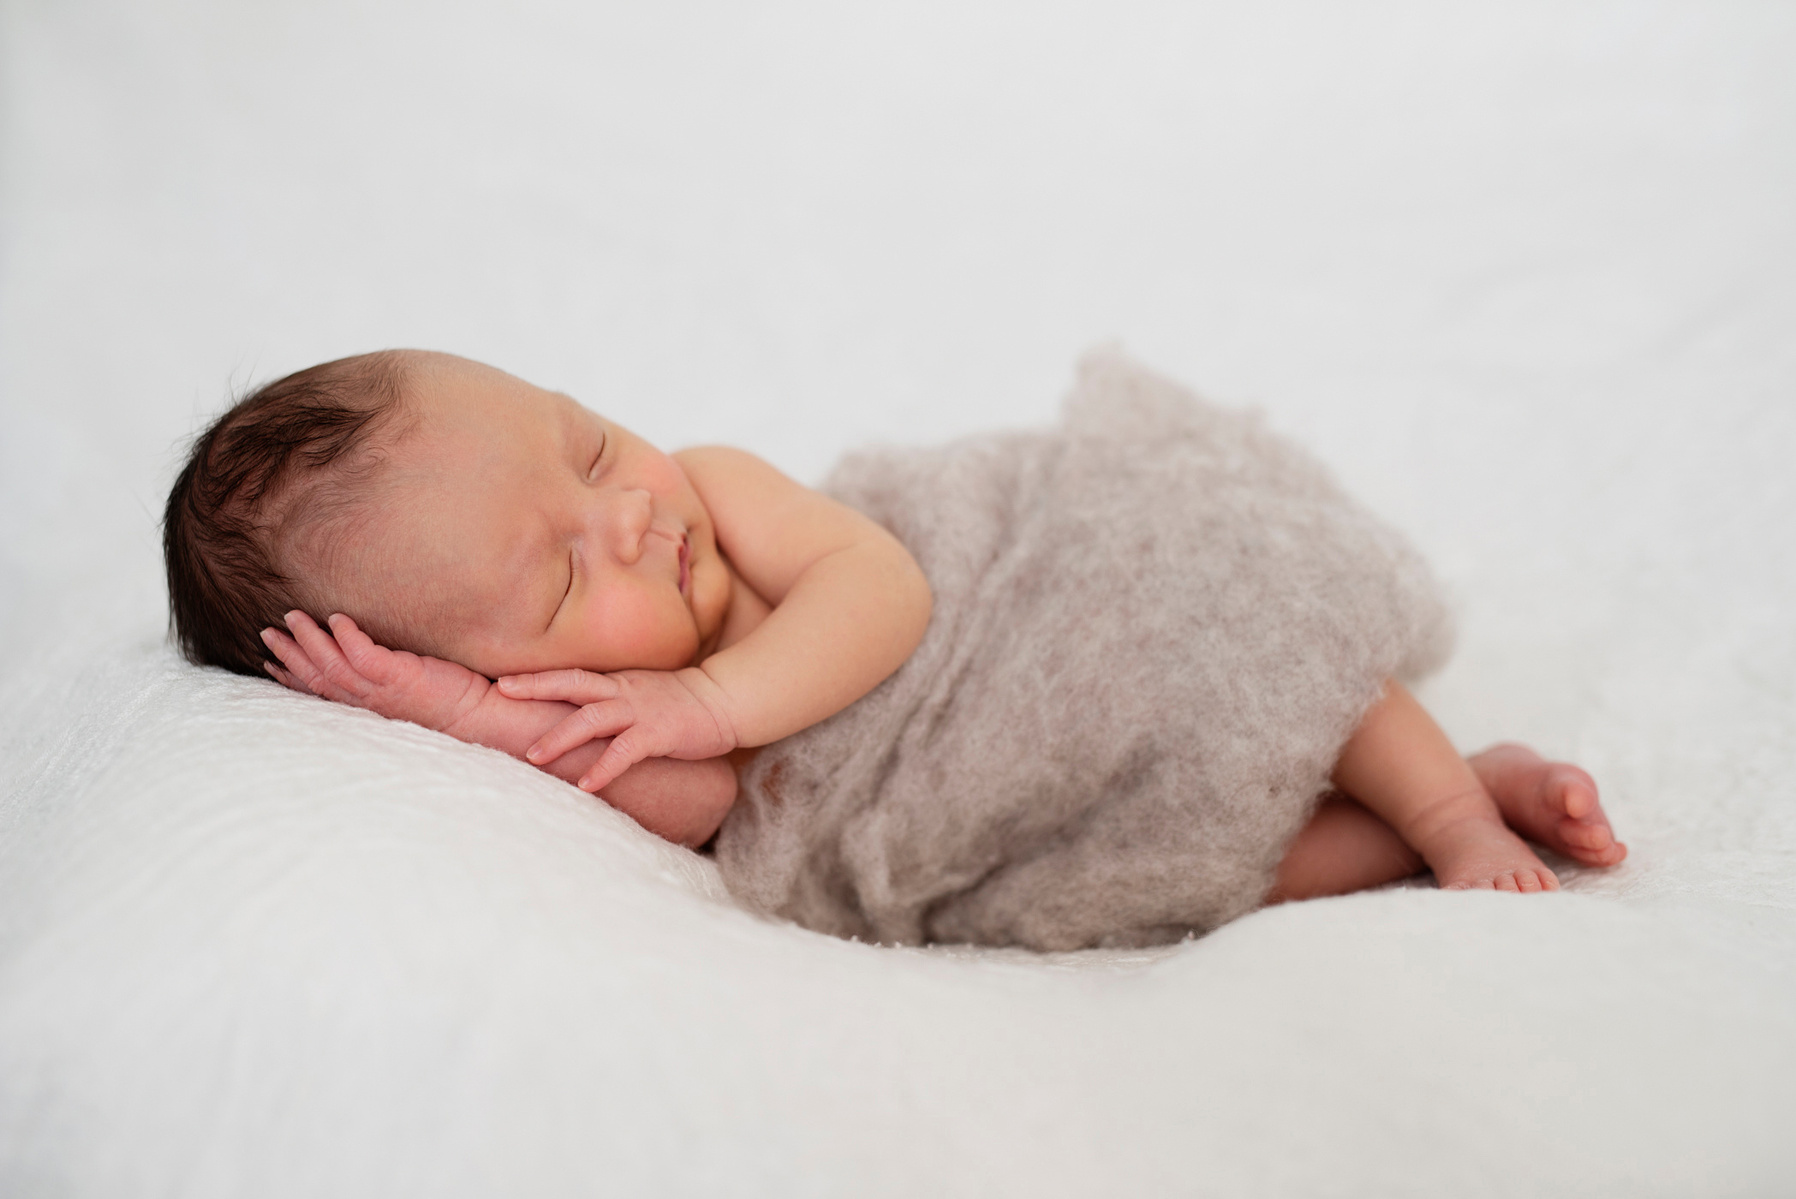 Newborn baby boy wrapped in felt sleeping on a white blanket, photographed by Helen Putsman, Geneva's leading family and newborn photographer.